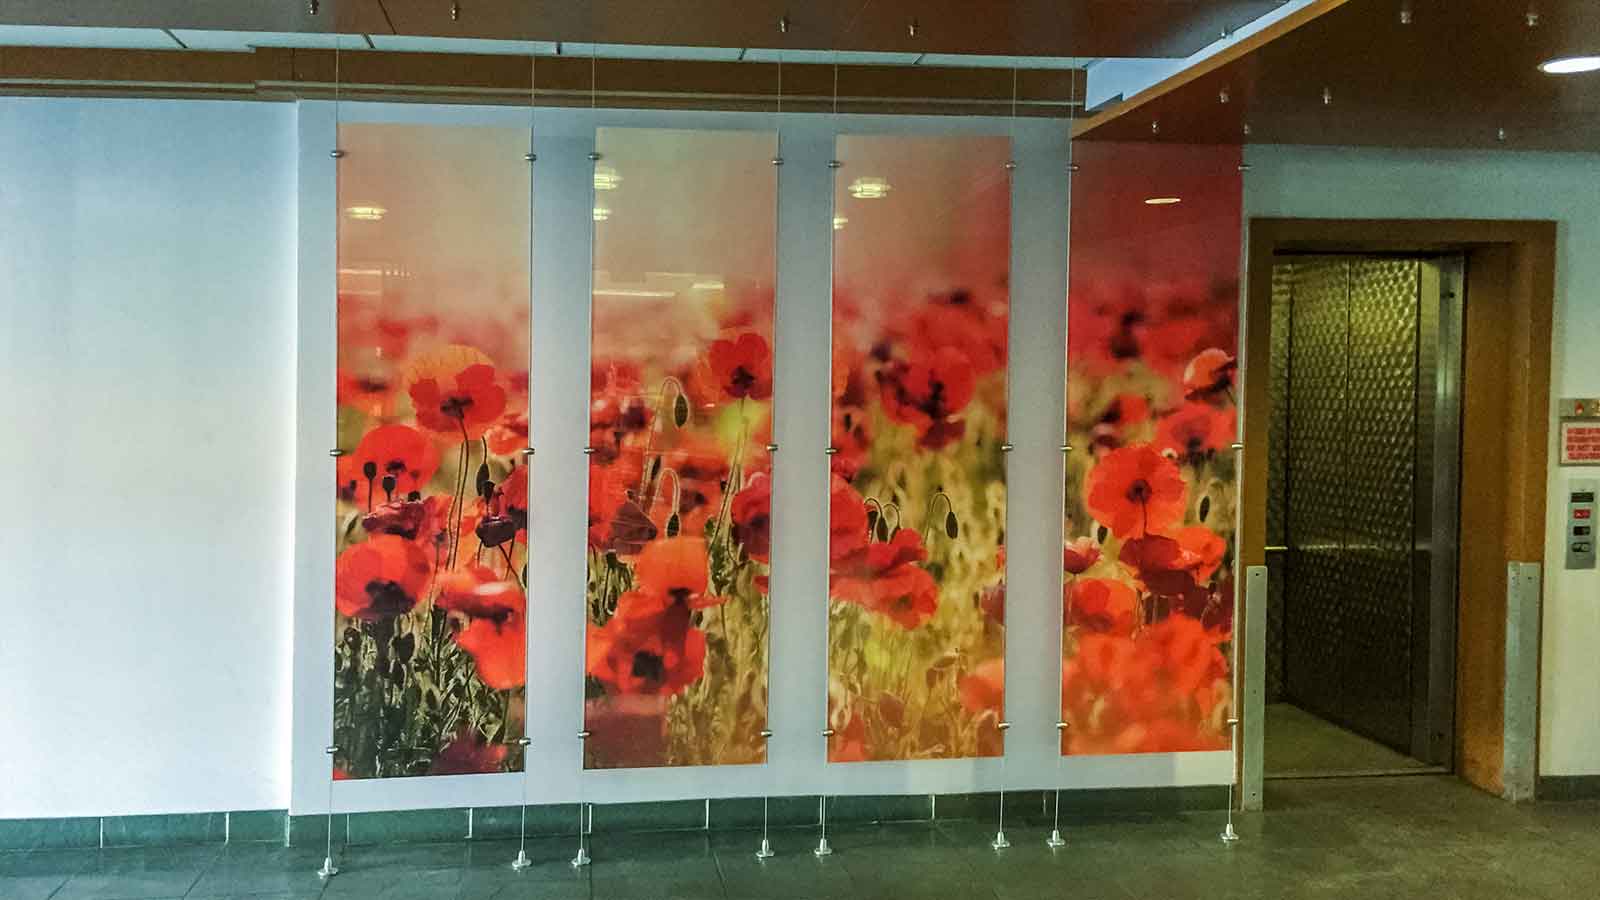 Printed Red Poppy imagery on an Acrylic Standoff signs